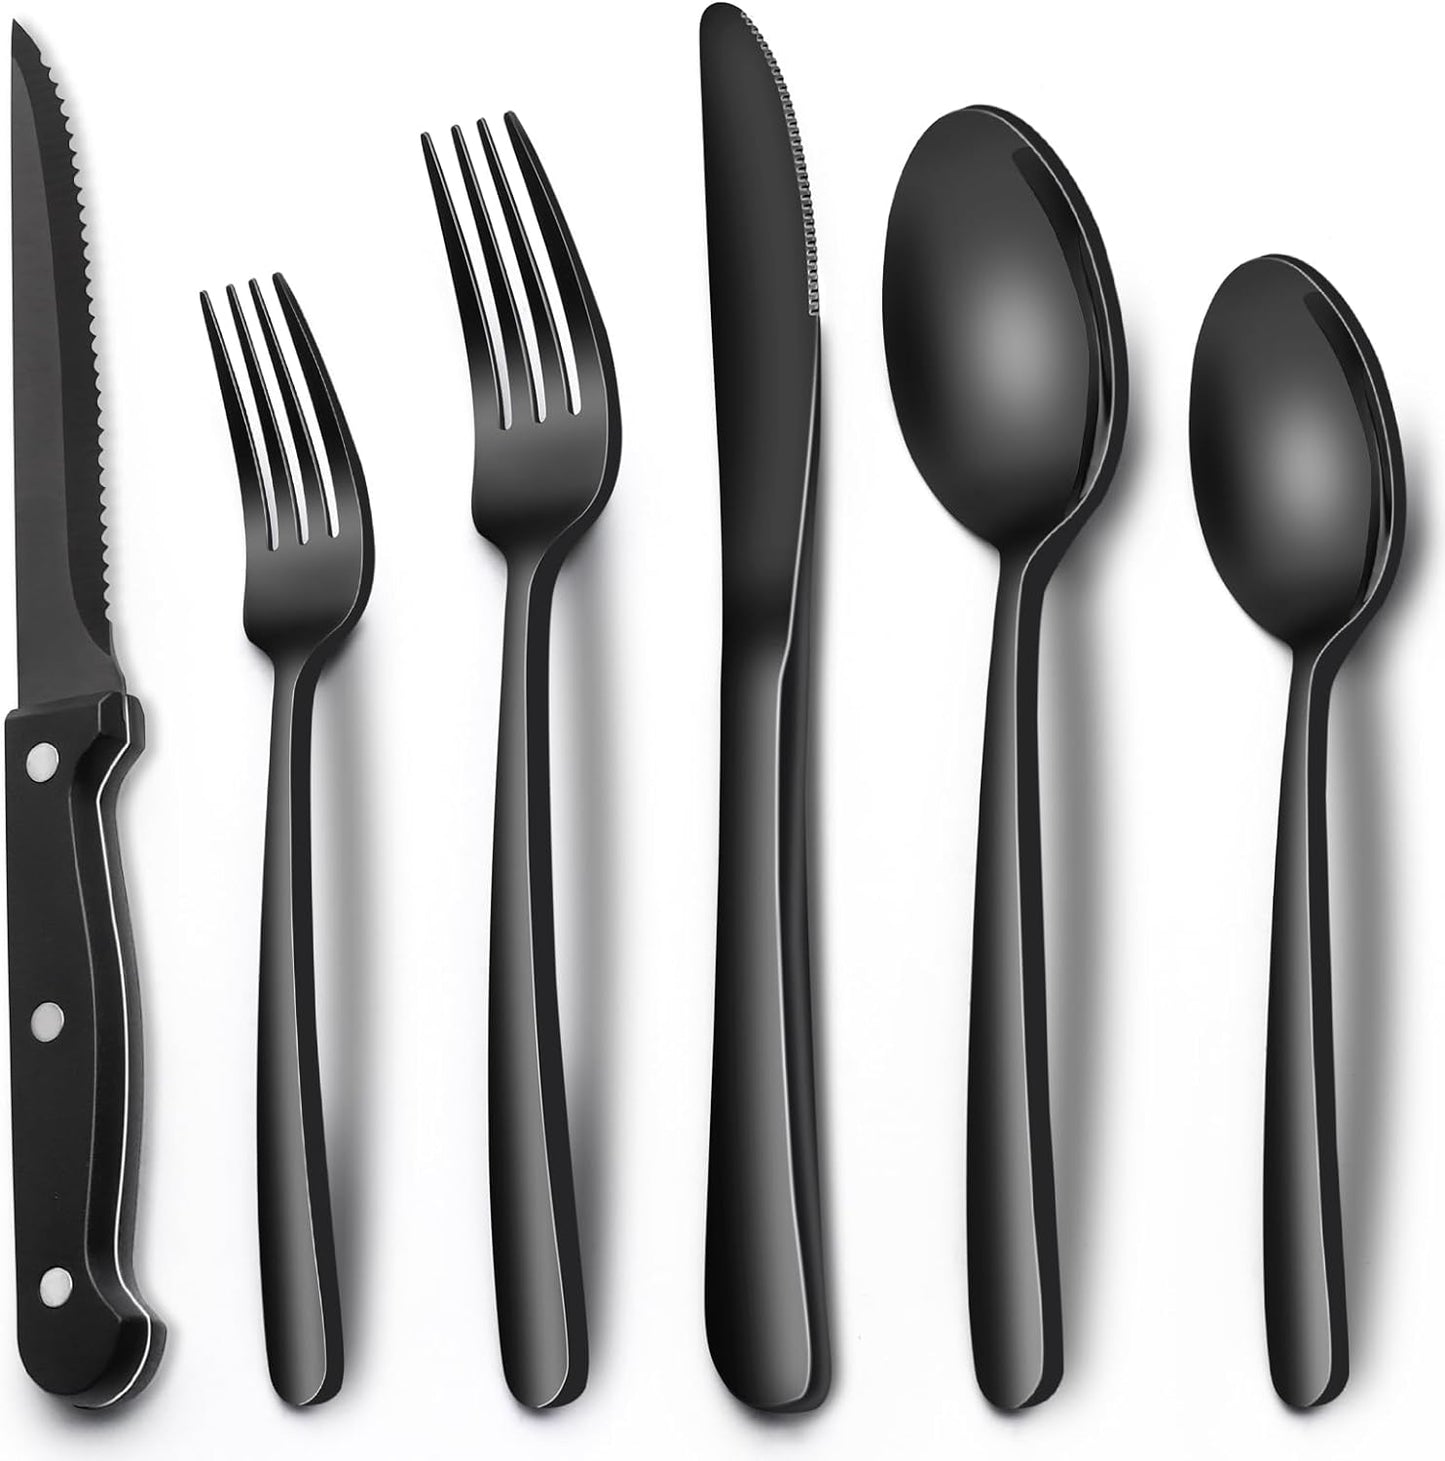 24-Piece Black Silverware Set with Steak Knives, Black Flatware Set for 4, Food-Grade Stainless Steel Tableware Cutlery Set, Mirror Finished Utensil Sets for Home Restaurant